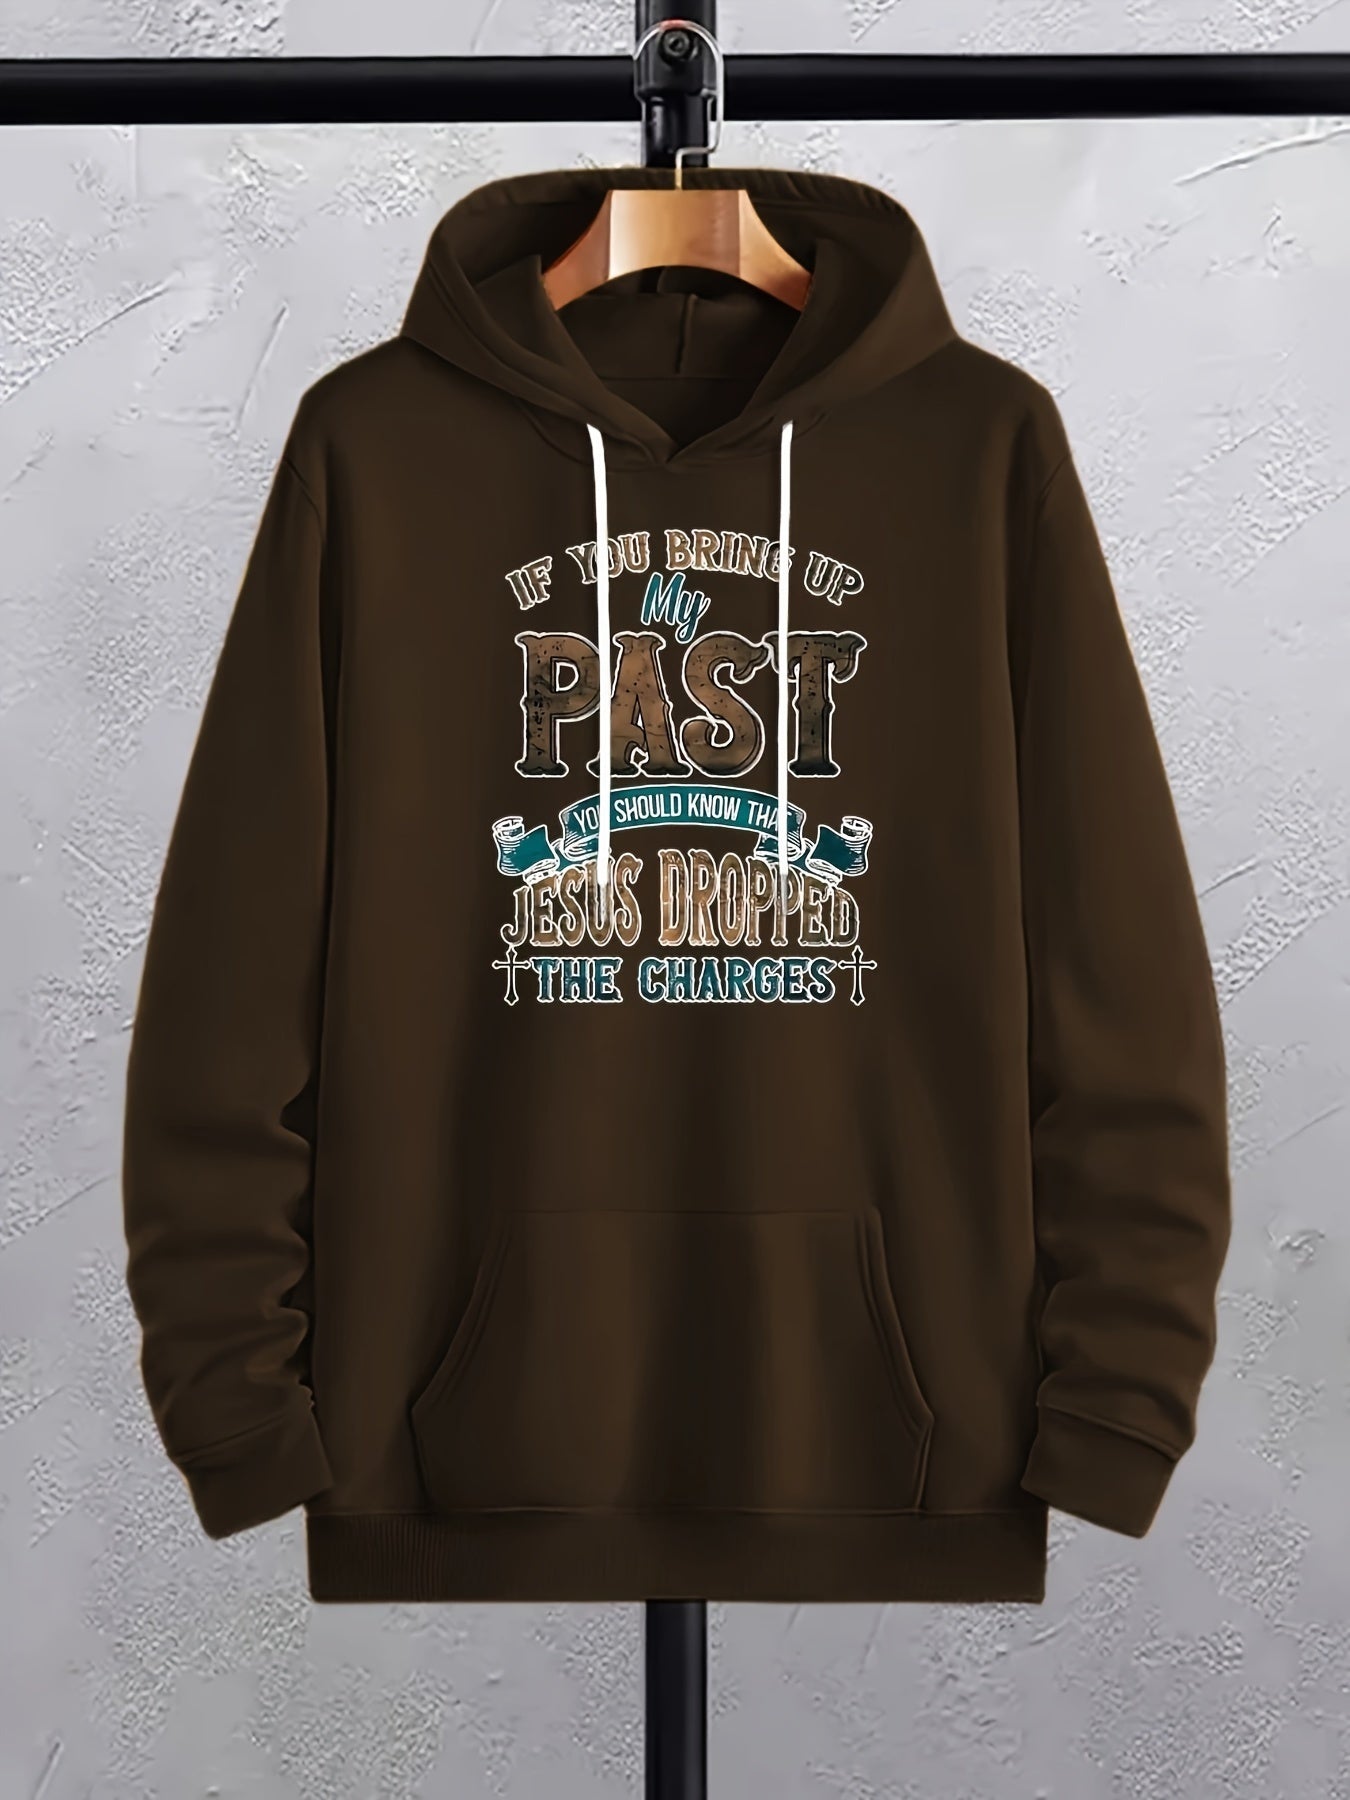 Jesus Dropped The Charges Plus Size Unisex Christian Pullover Hooded Sweatshirt claimedbygoddesigns